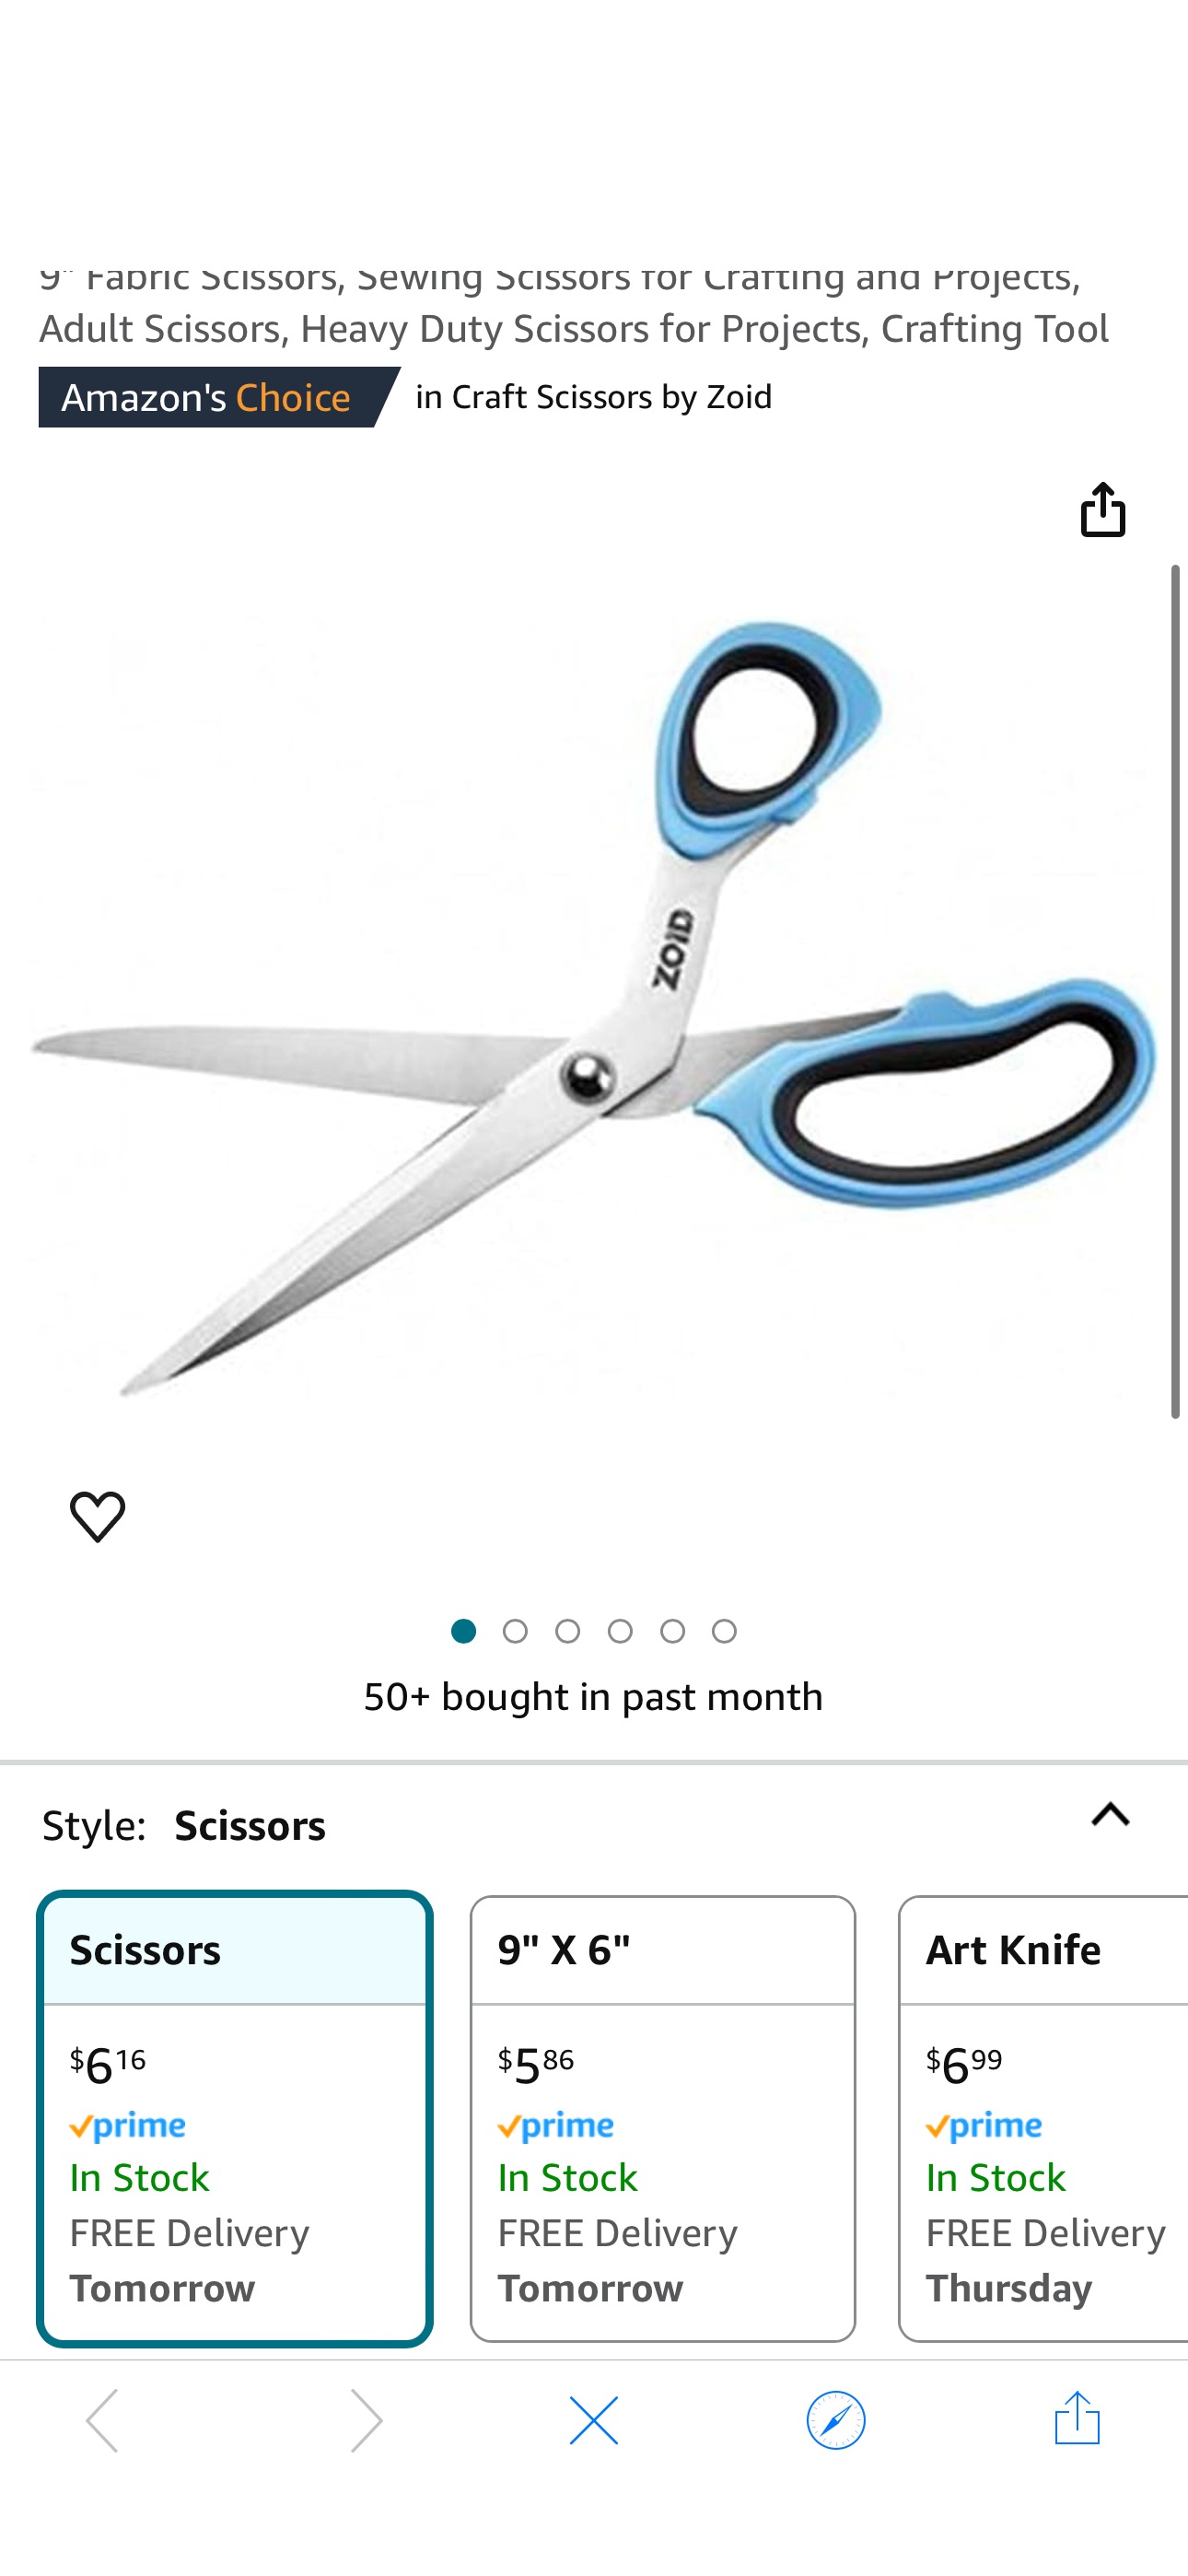 Amazon.com: Zoid 9" Fabric Scissors, Sewing Scissors for Crafting and Projects, Adult Scissors, Heavy Duty Scissors for Projects, Crafting Tool